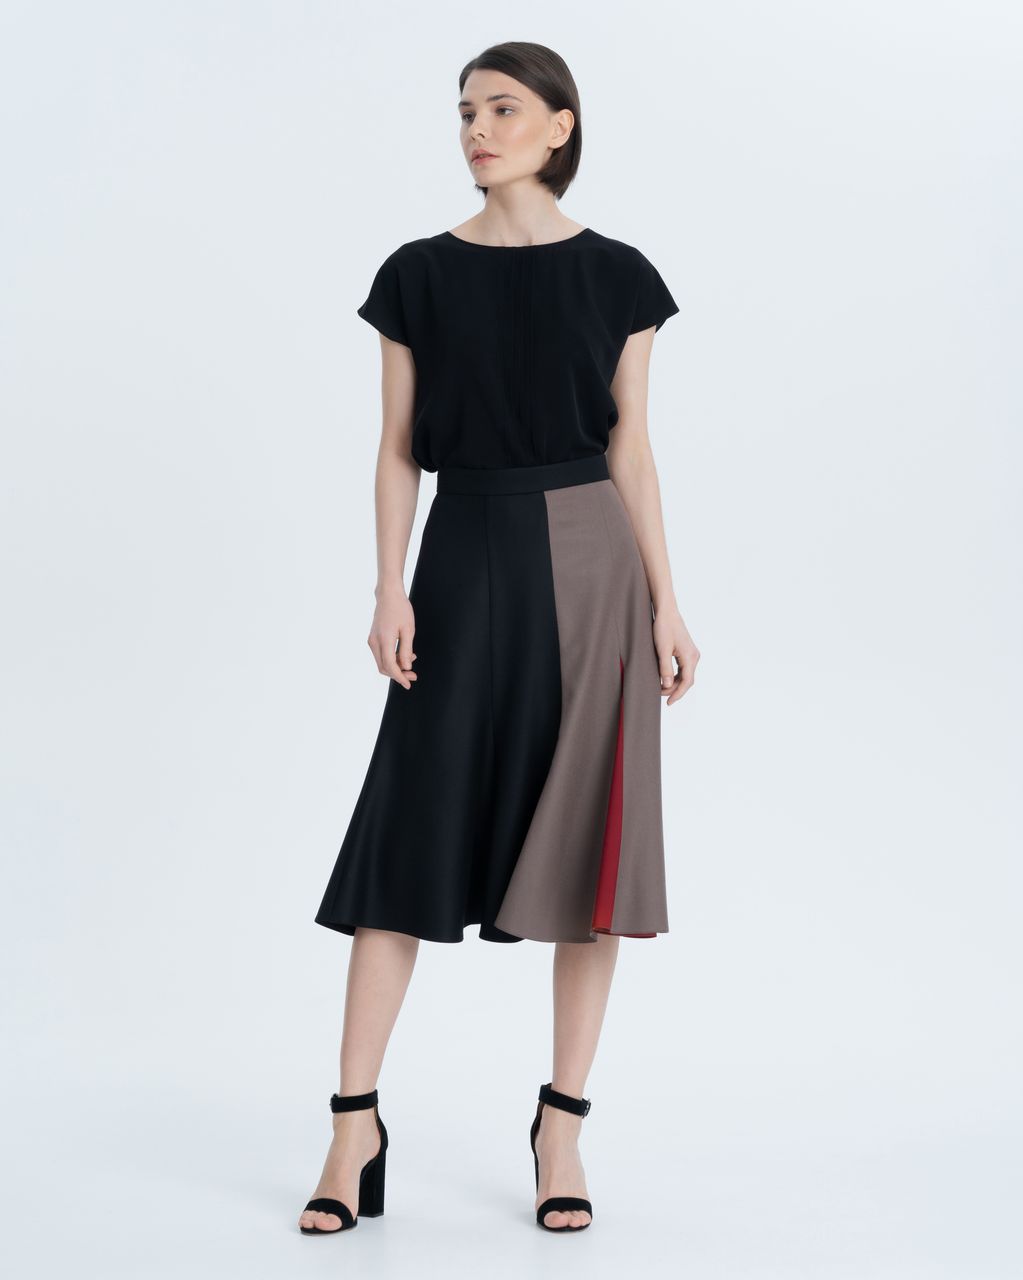 Asymmetric skirt made of premium Italian wool with a thin viscose lining. The combination of black, coffee and delicate dark red accents will allow you to combine the skirt with various things in your wardrobe.